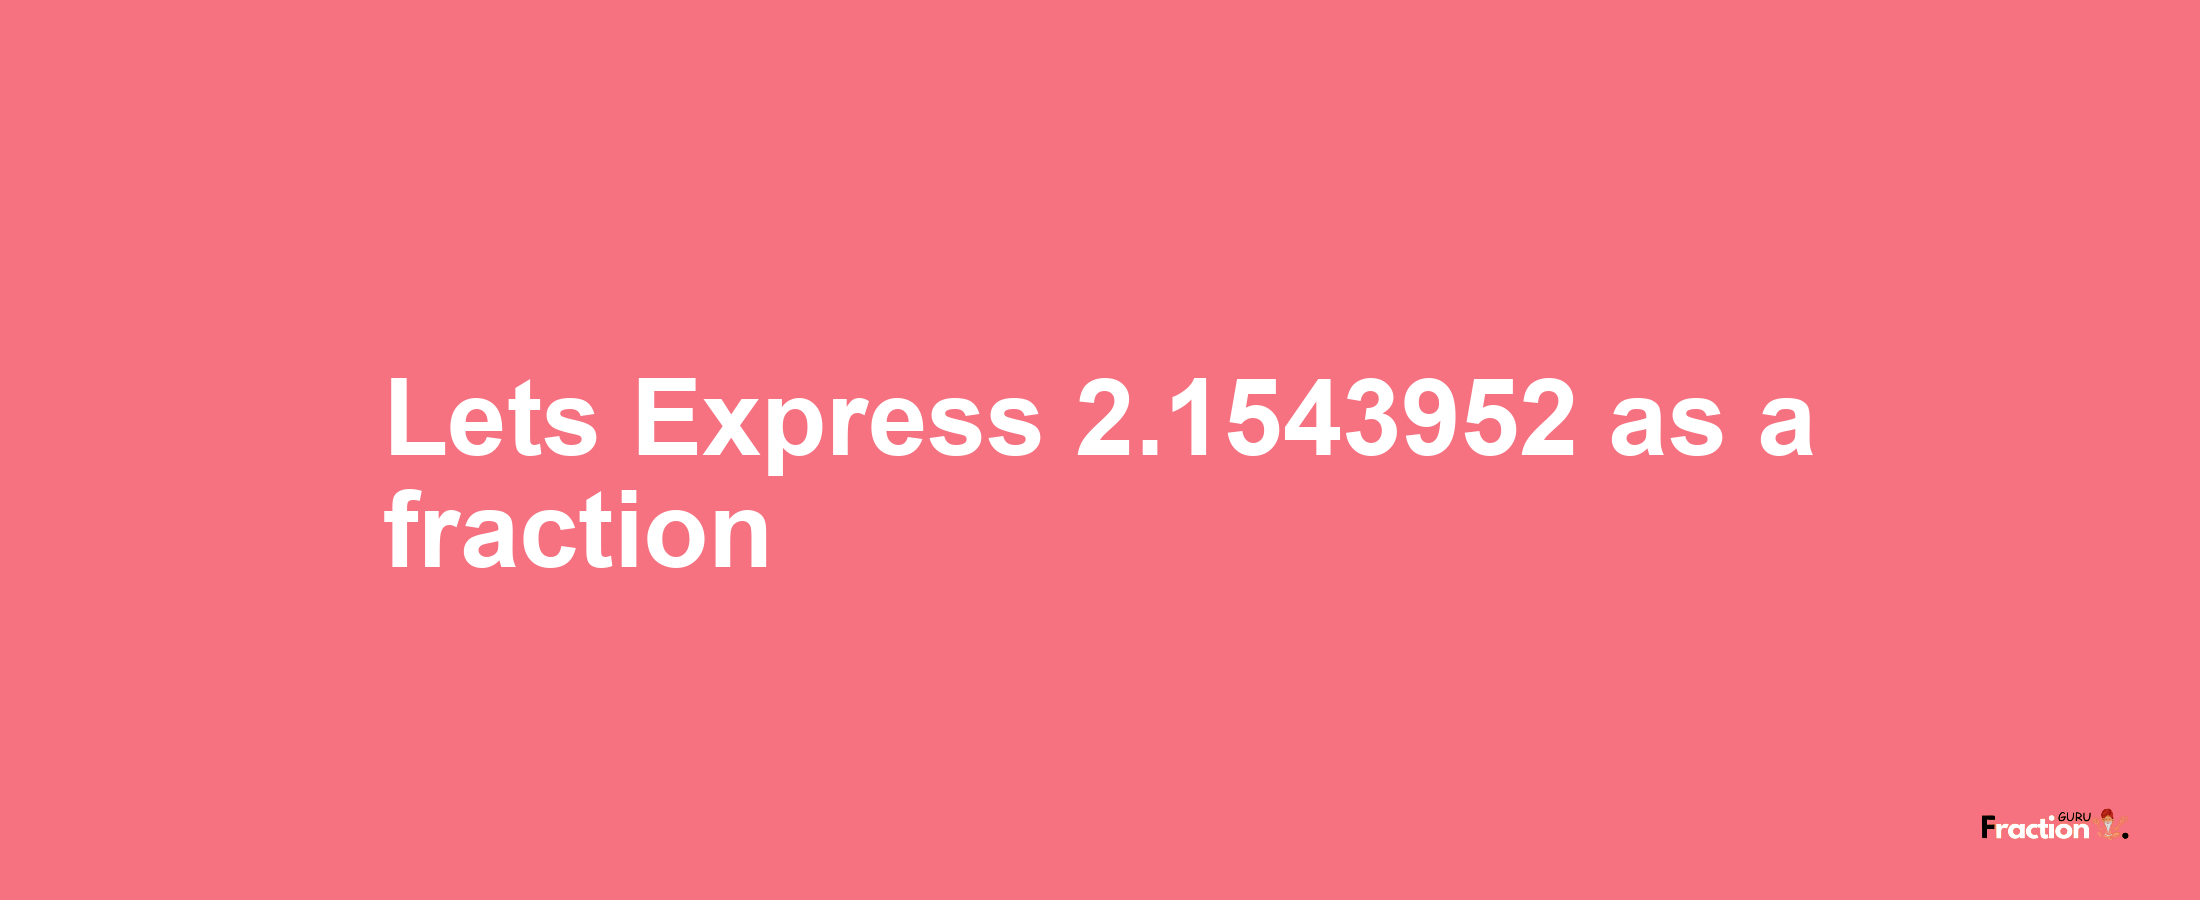 Lets Express 2.1543952 as afraction